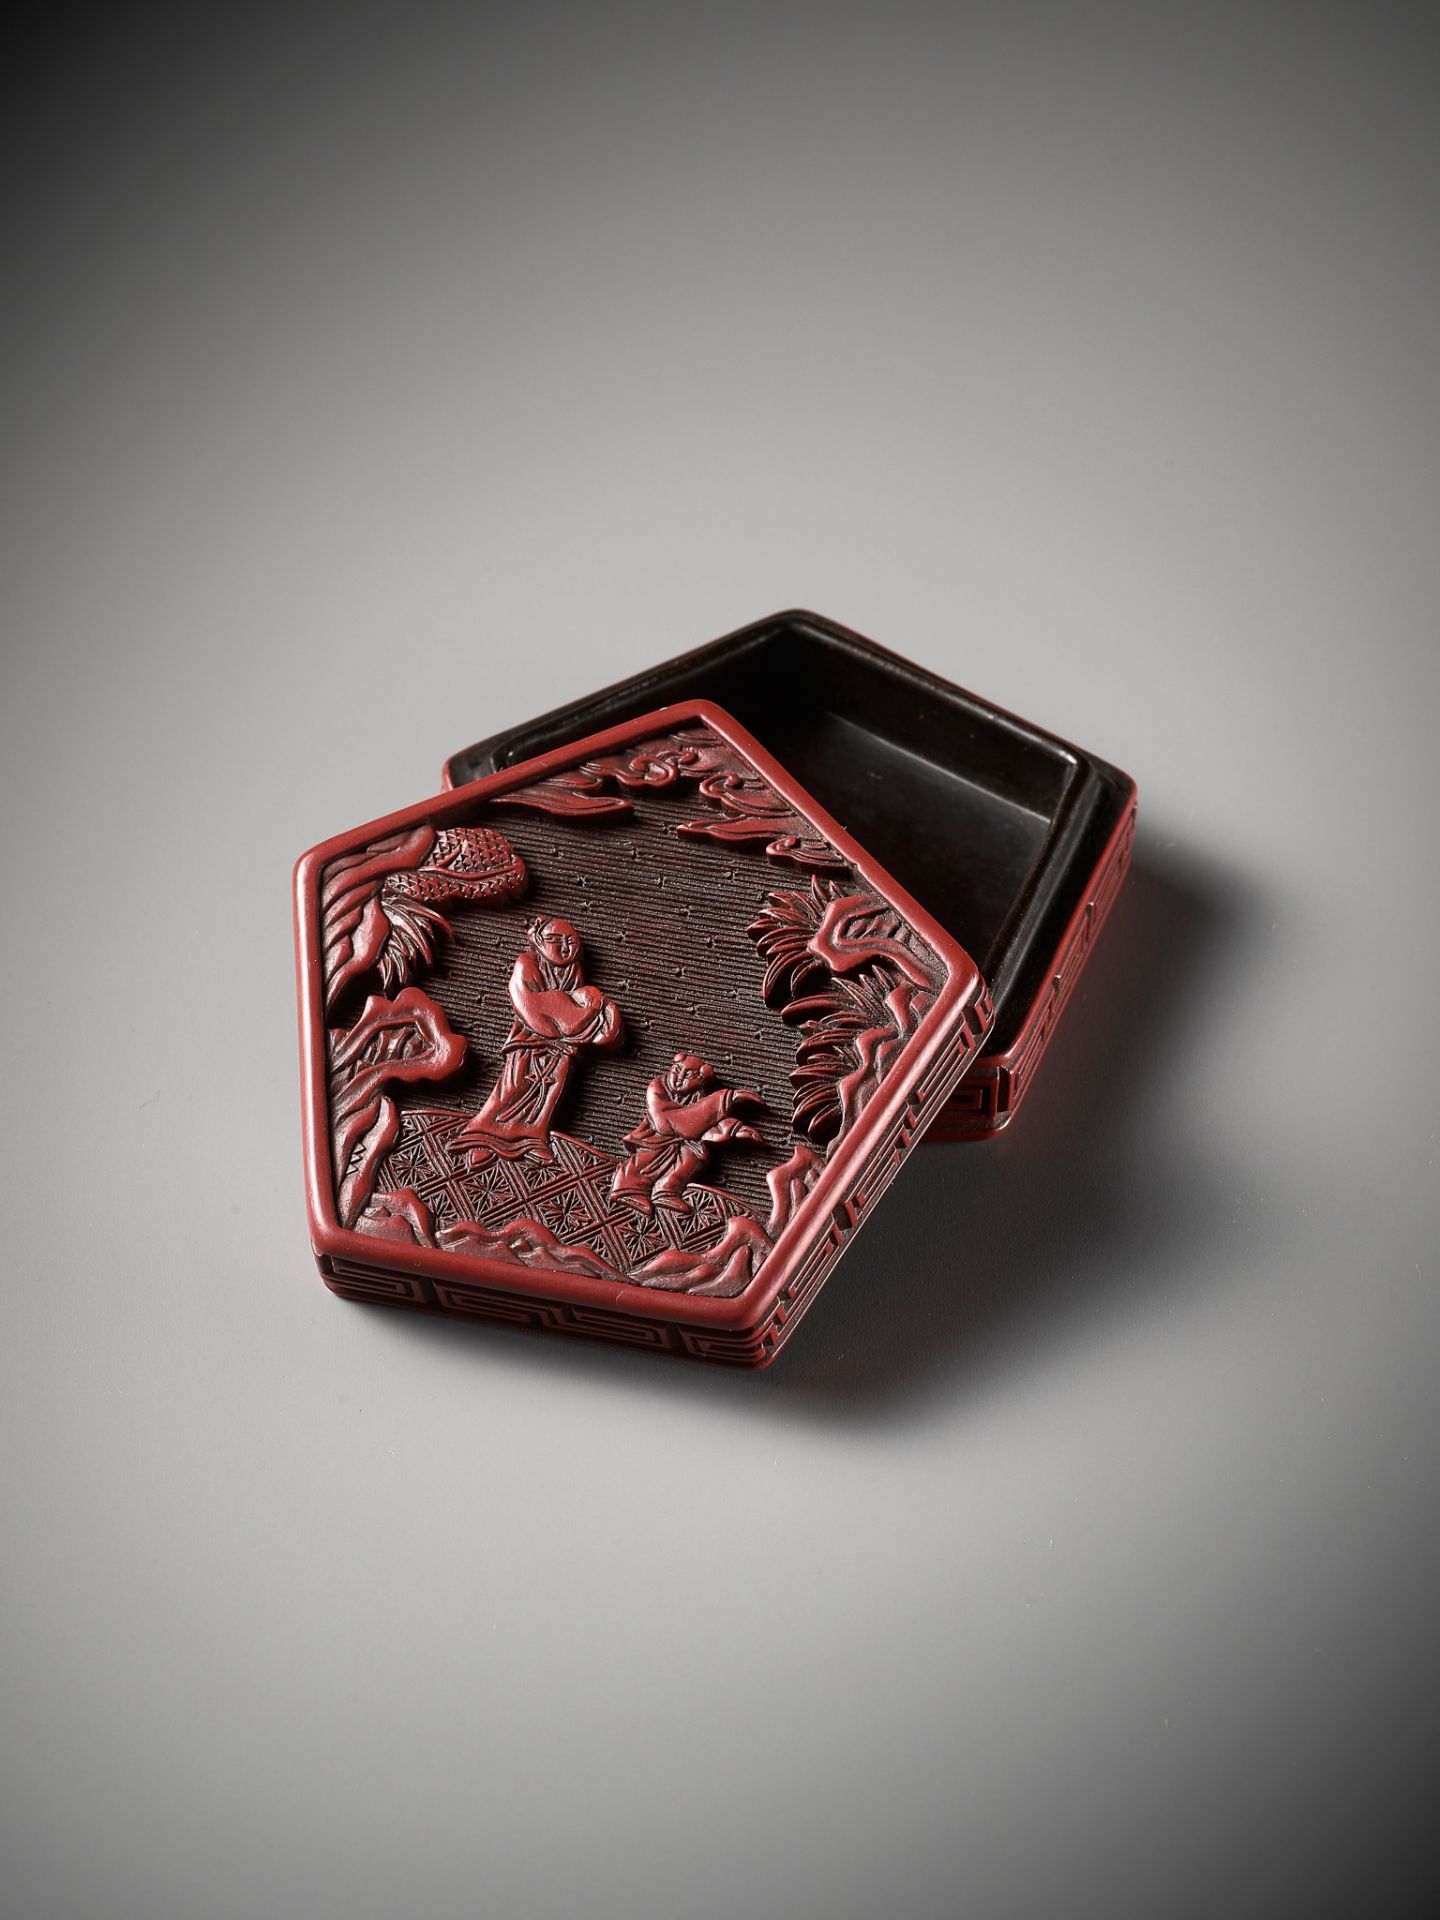 A SMALL CINNABAR LACQUER BOX AND COVER, YUAN TO MID-MING DYNASTY - Image 8 of 13